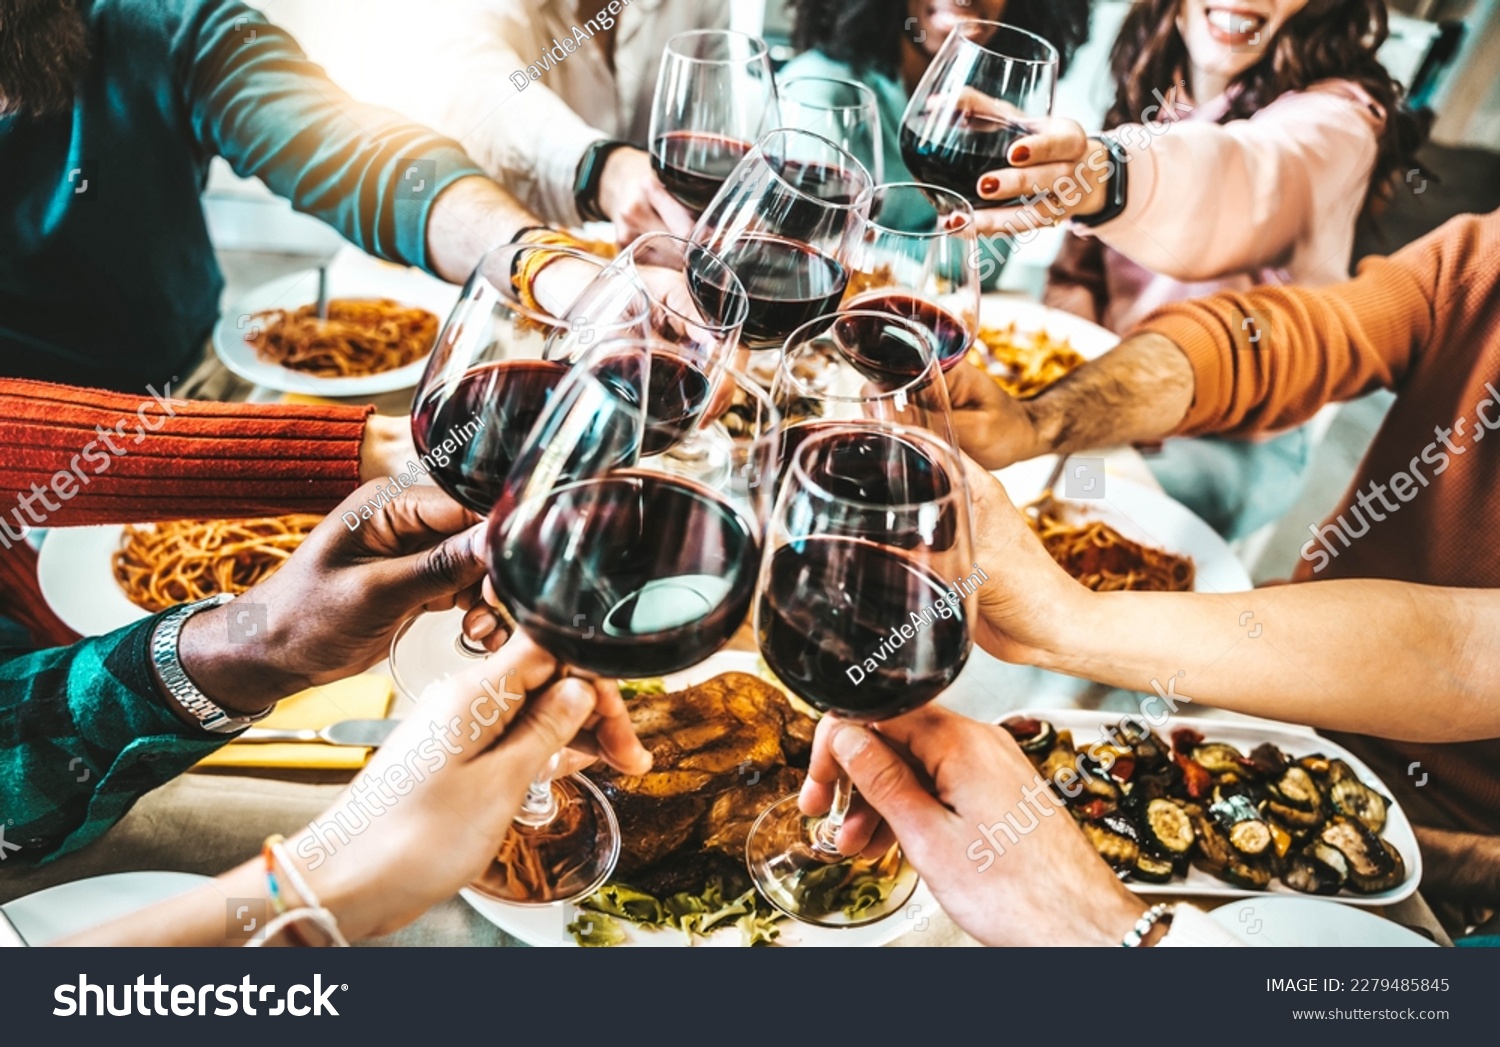 Happy friends toasting red wine glasses at dinner party - Group of people having lunch break at bar restaurant - Life style concept with guys and girls hanging out together - Food and beverage  #2279485845